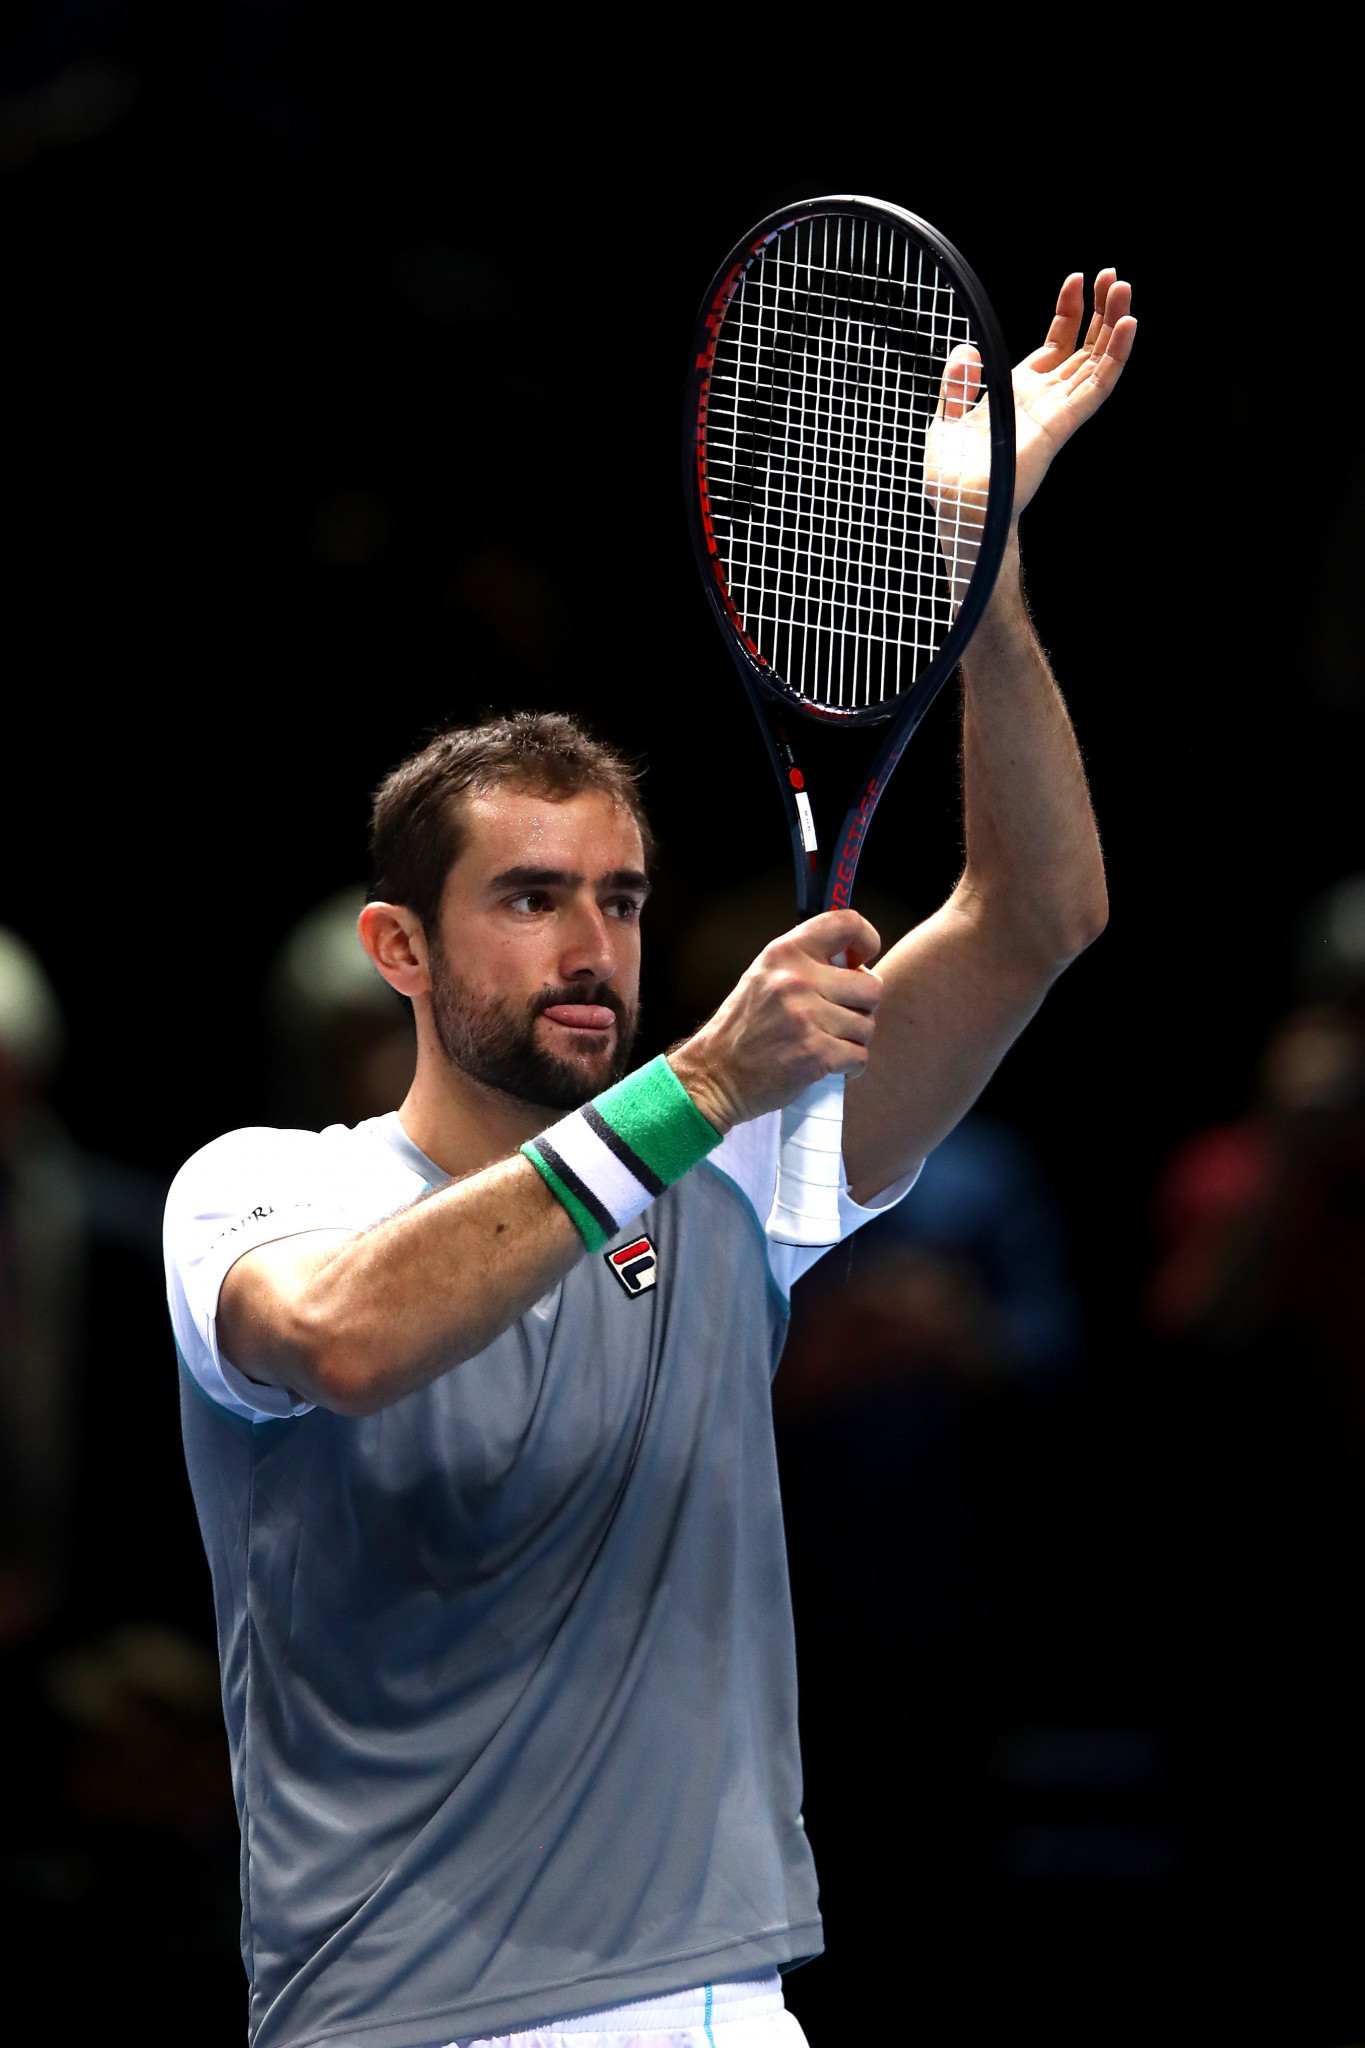  Cilic victory over Isner puts Djokovic through to semi-finals at ATP Finals in London